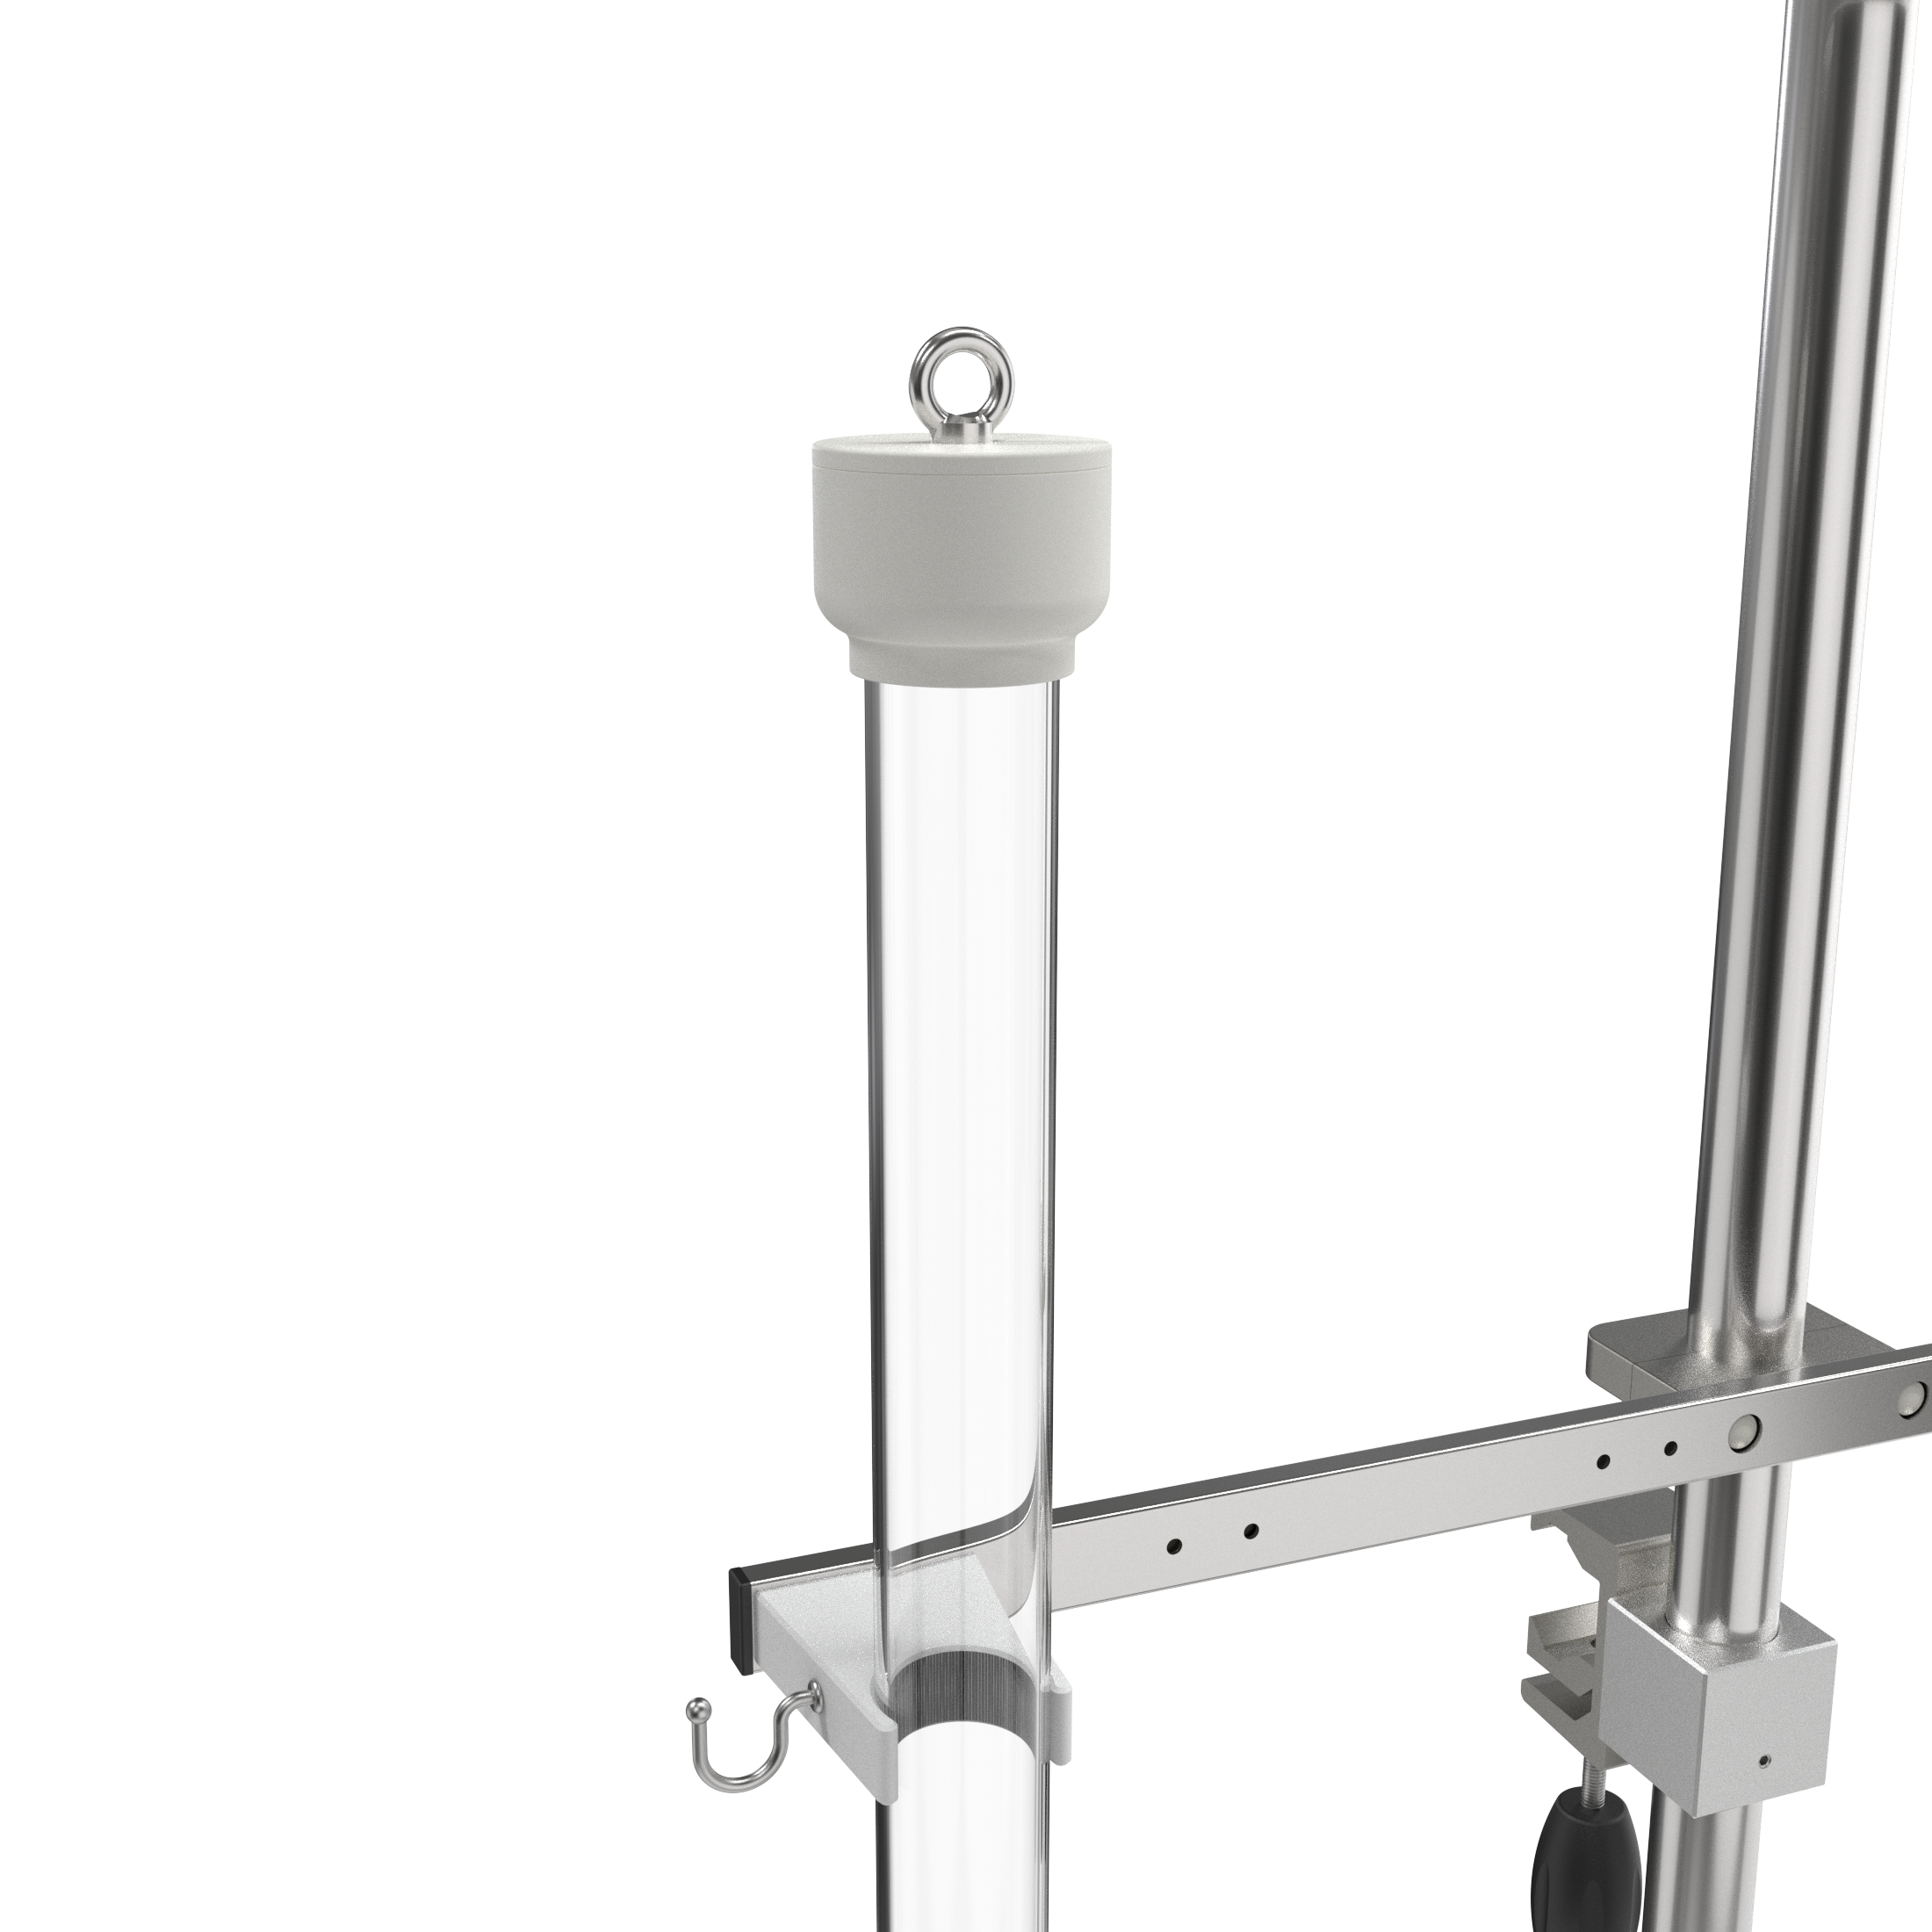 Round tube for wall rails, with 1 tube